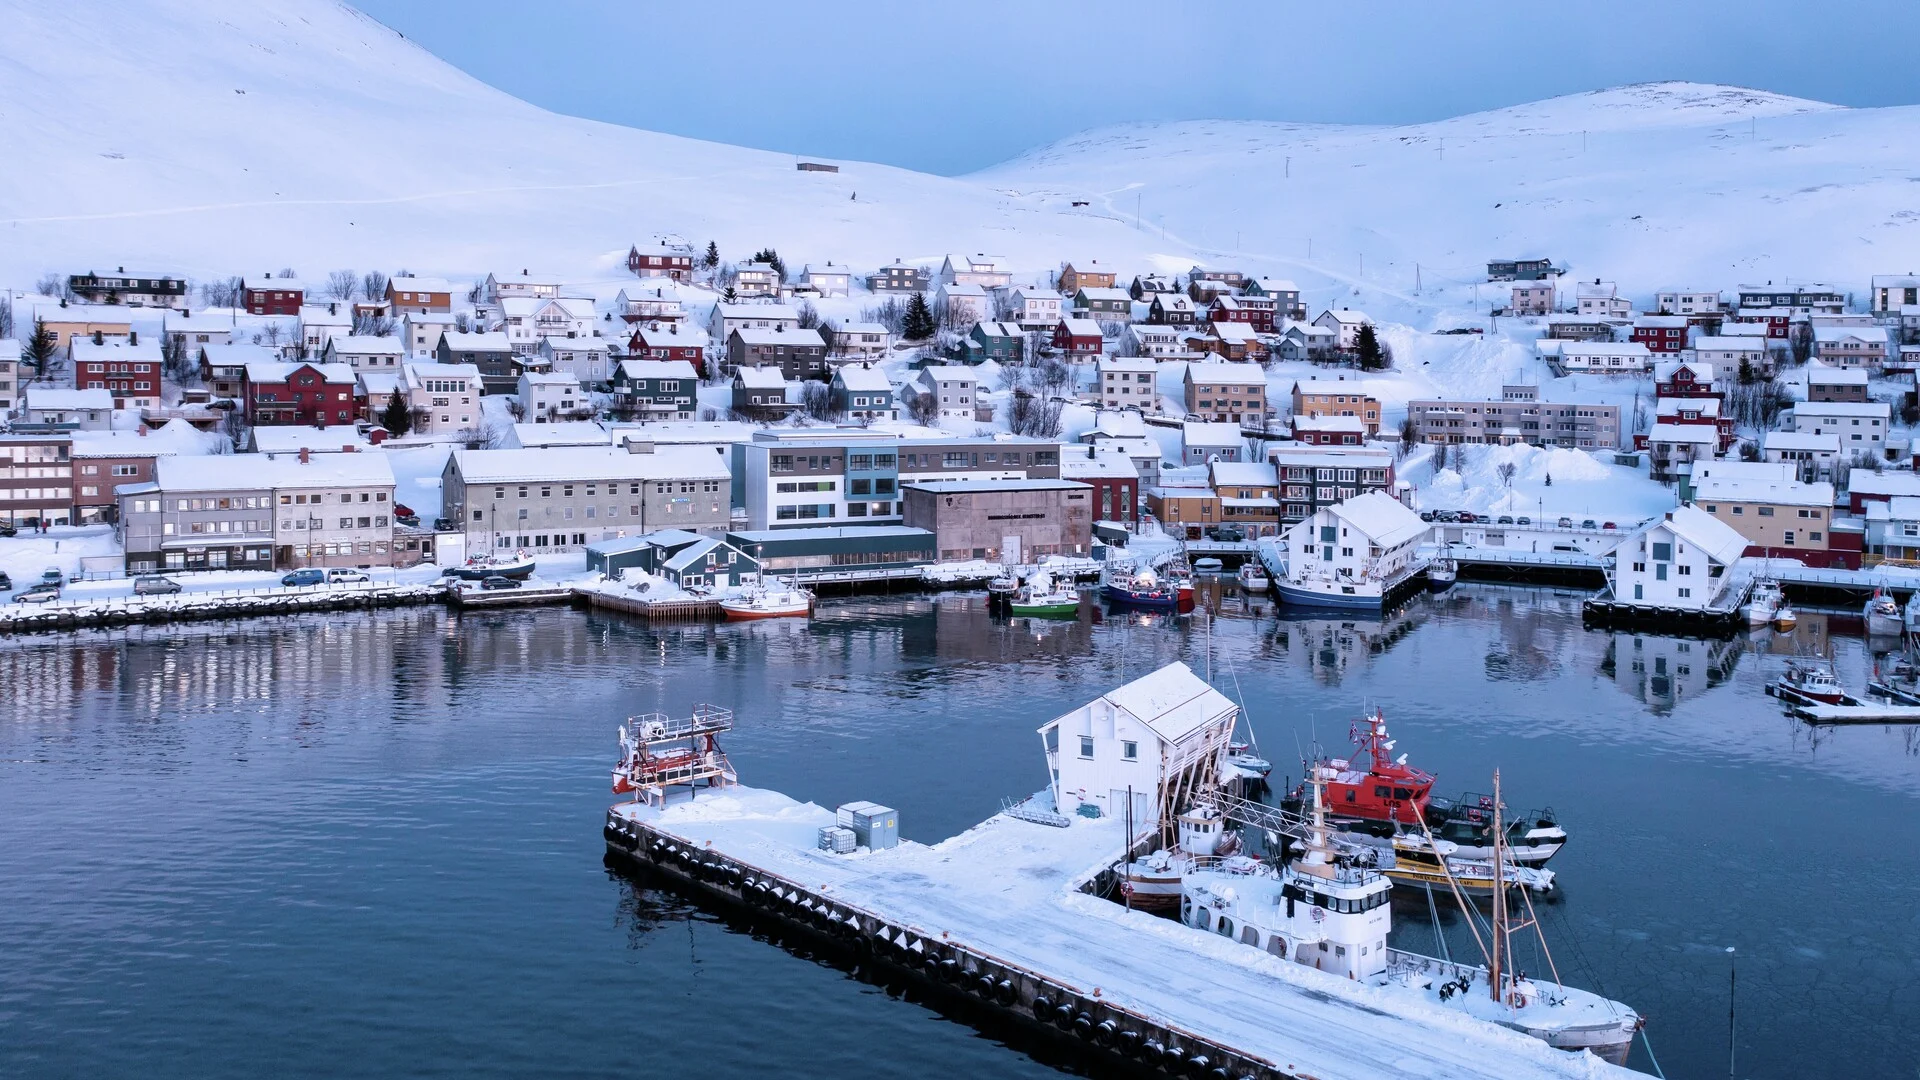 The port of Honningsvåg covered in snow